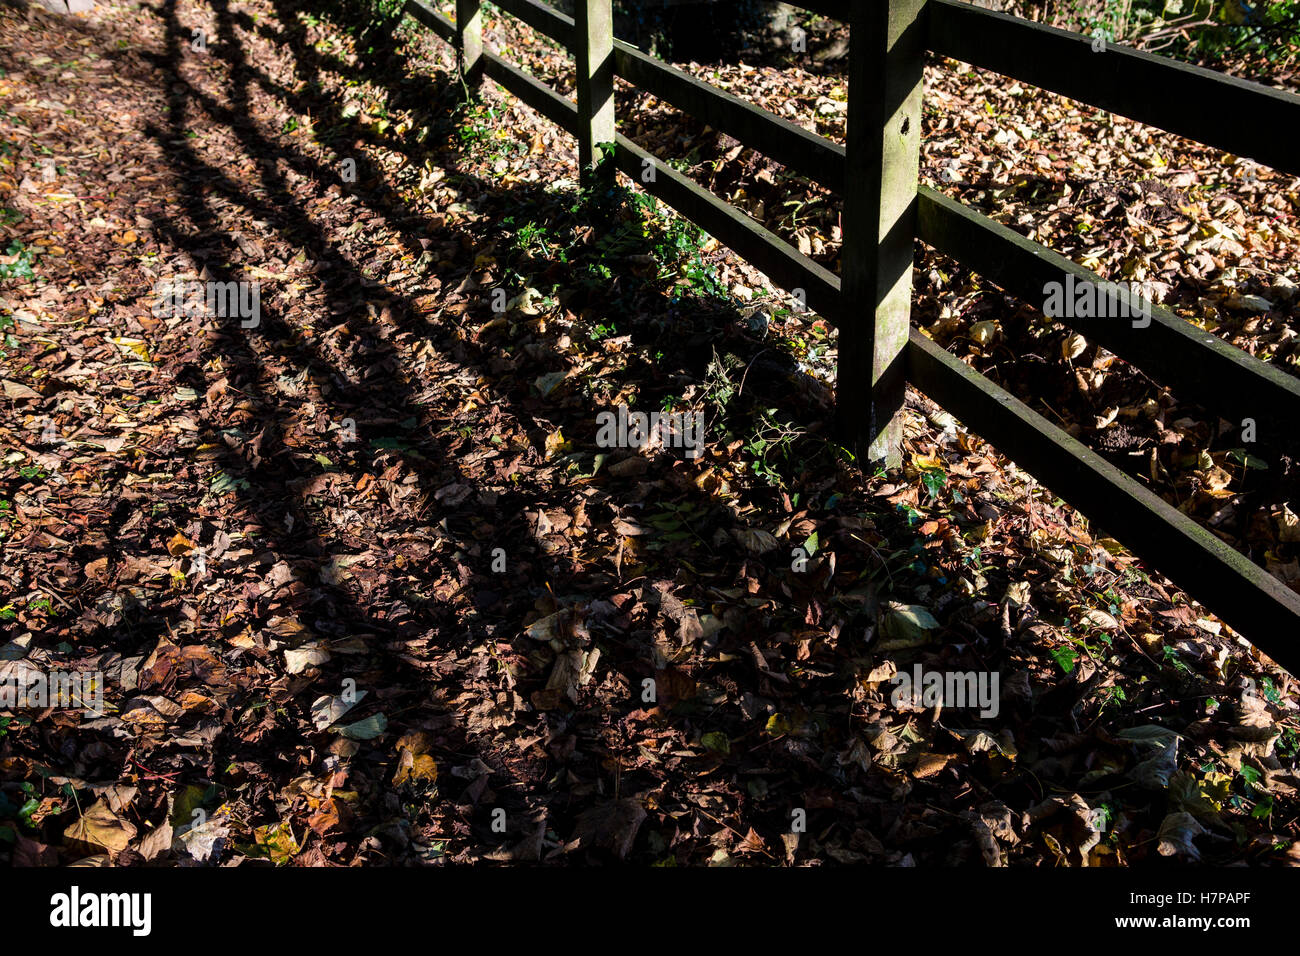 Dead leaves scattered across a country path with the shadow of a wooden fence cast over the ground. Stock Photo